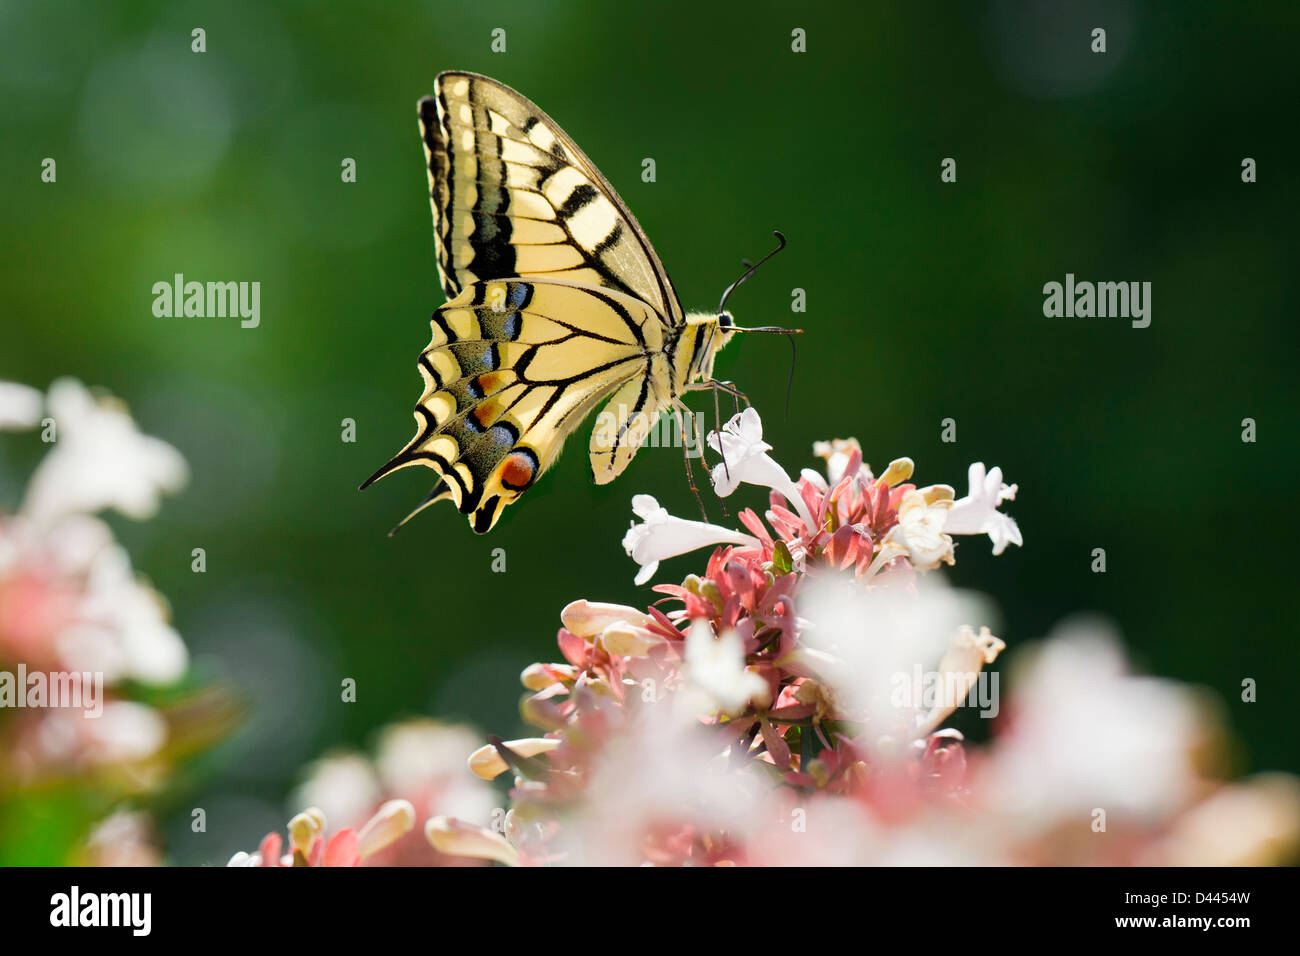 Close up of a yellow swallowtail butterfly (lepidoptera) sucking nectar from abelia flowers in a beautiful garden. Stock Photo